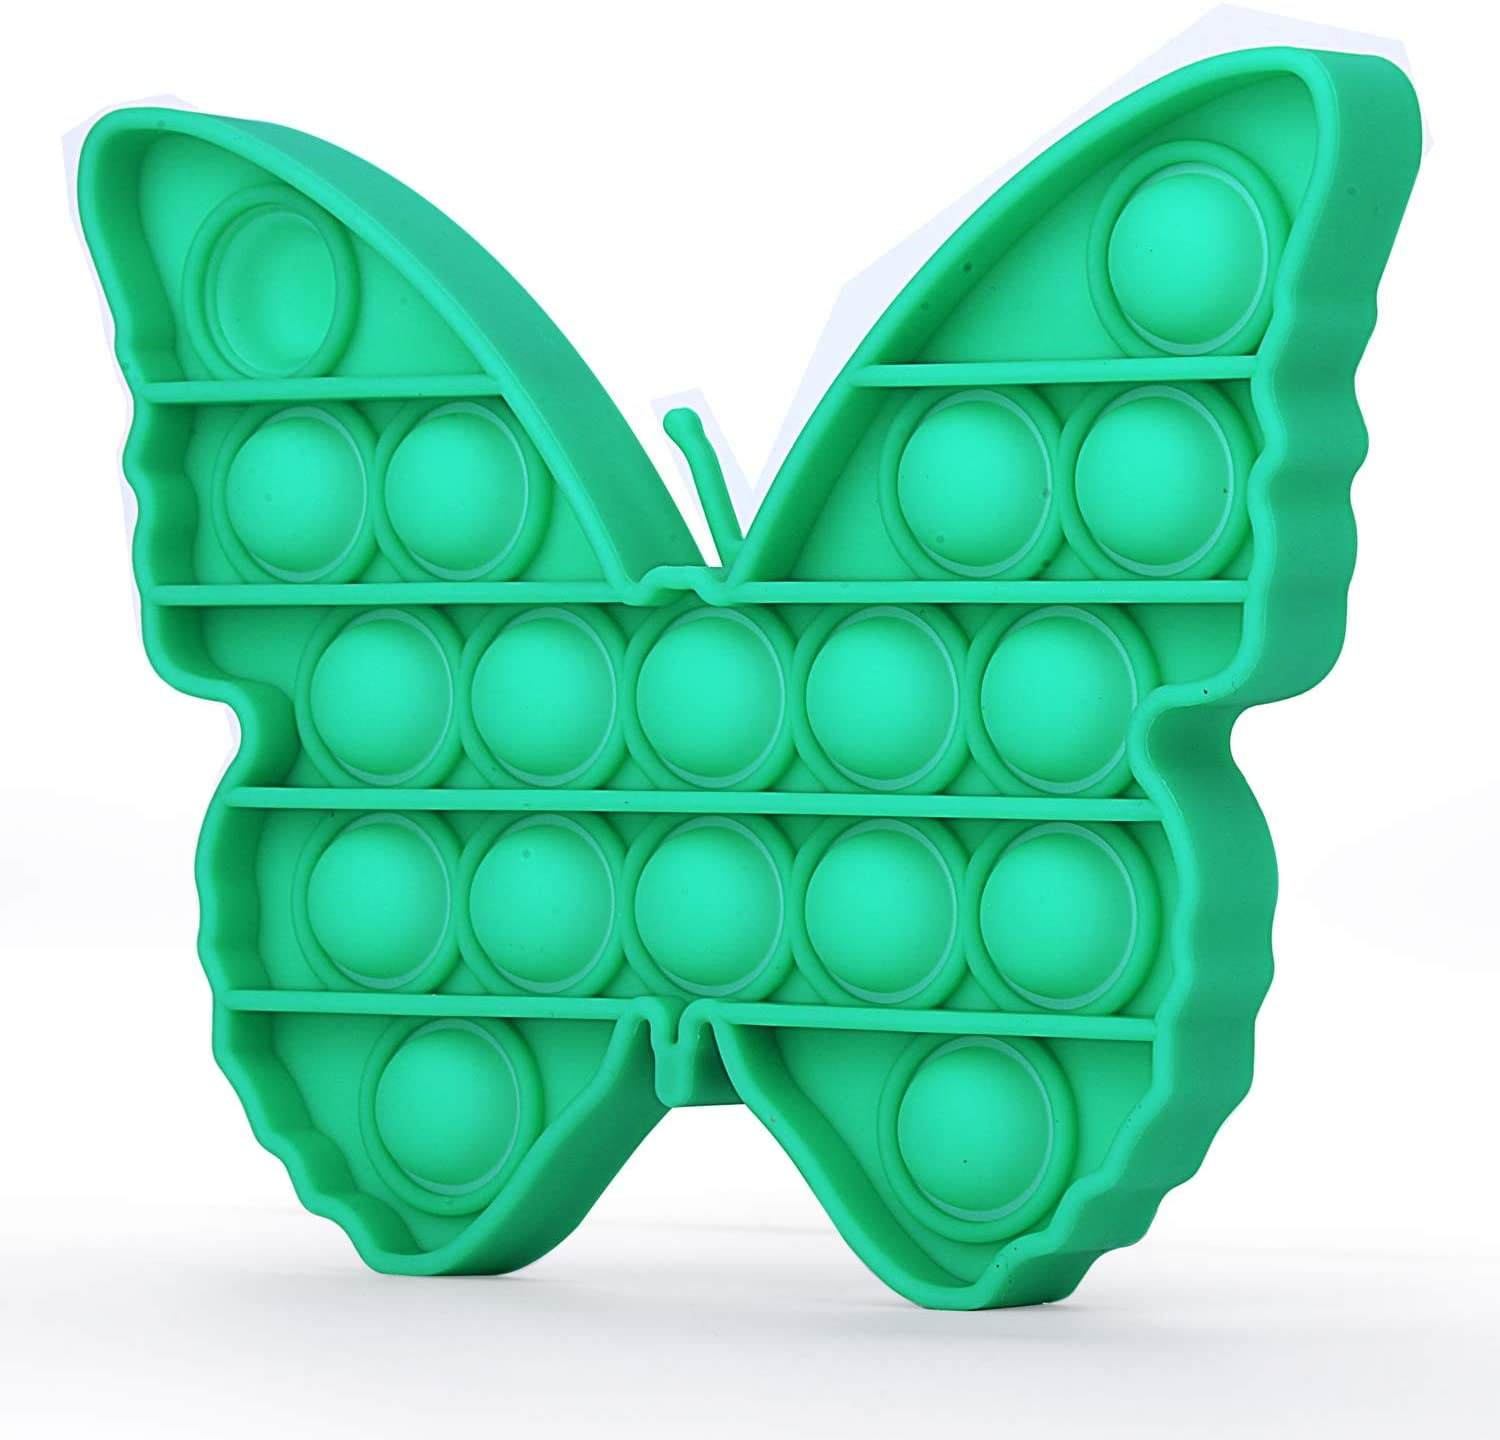 Push Pop Pop Bubble Sensory Fidget Toy,LAFUN Silicone Stress Reliever Autism Special Needs Toys,Squeeze Sensory Toy Anti-Anxiety Tools Help Restore Emotions for The Old and The Young Butterfly,Green